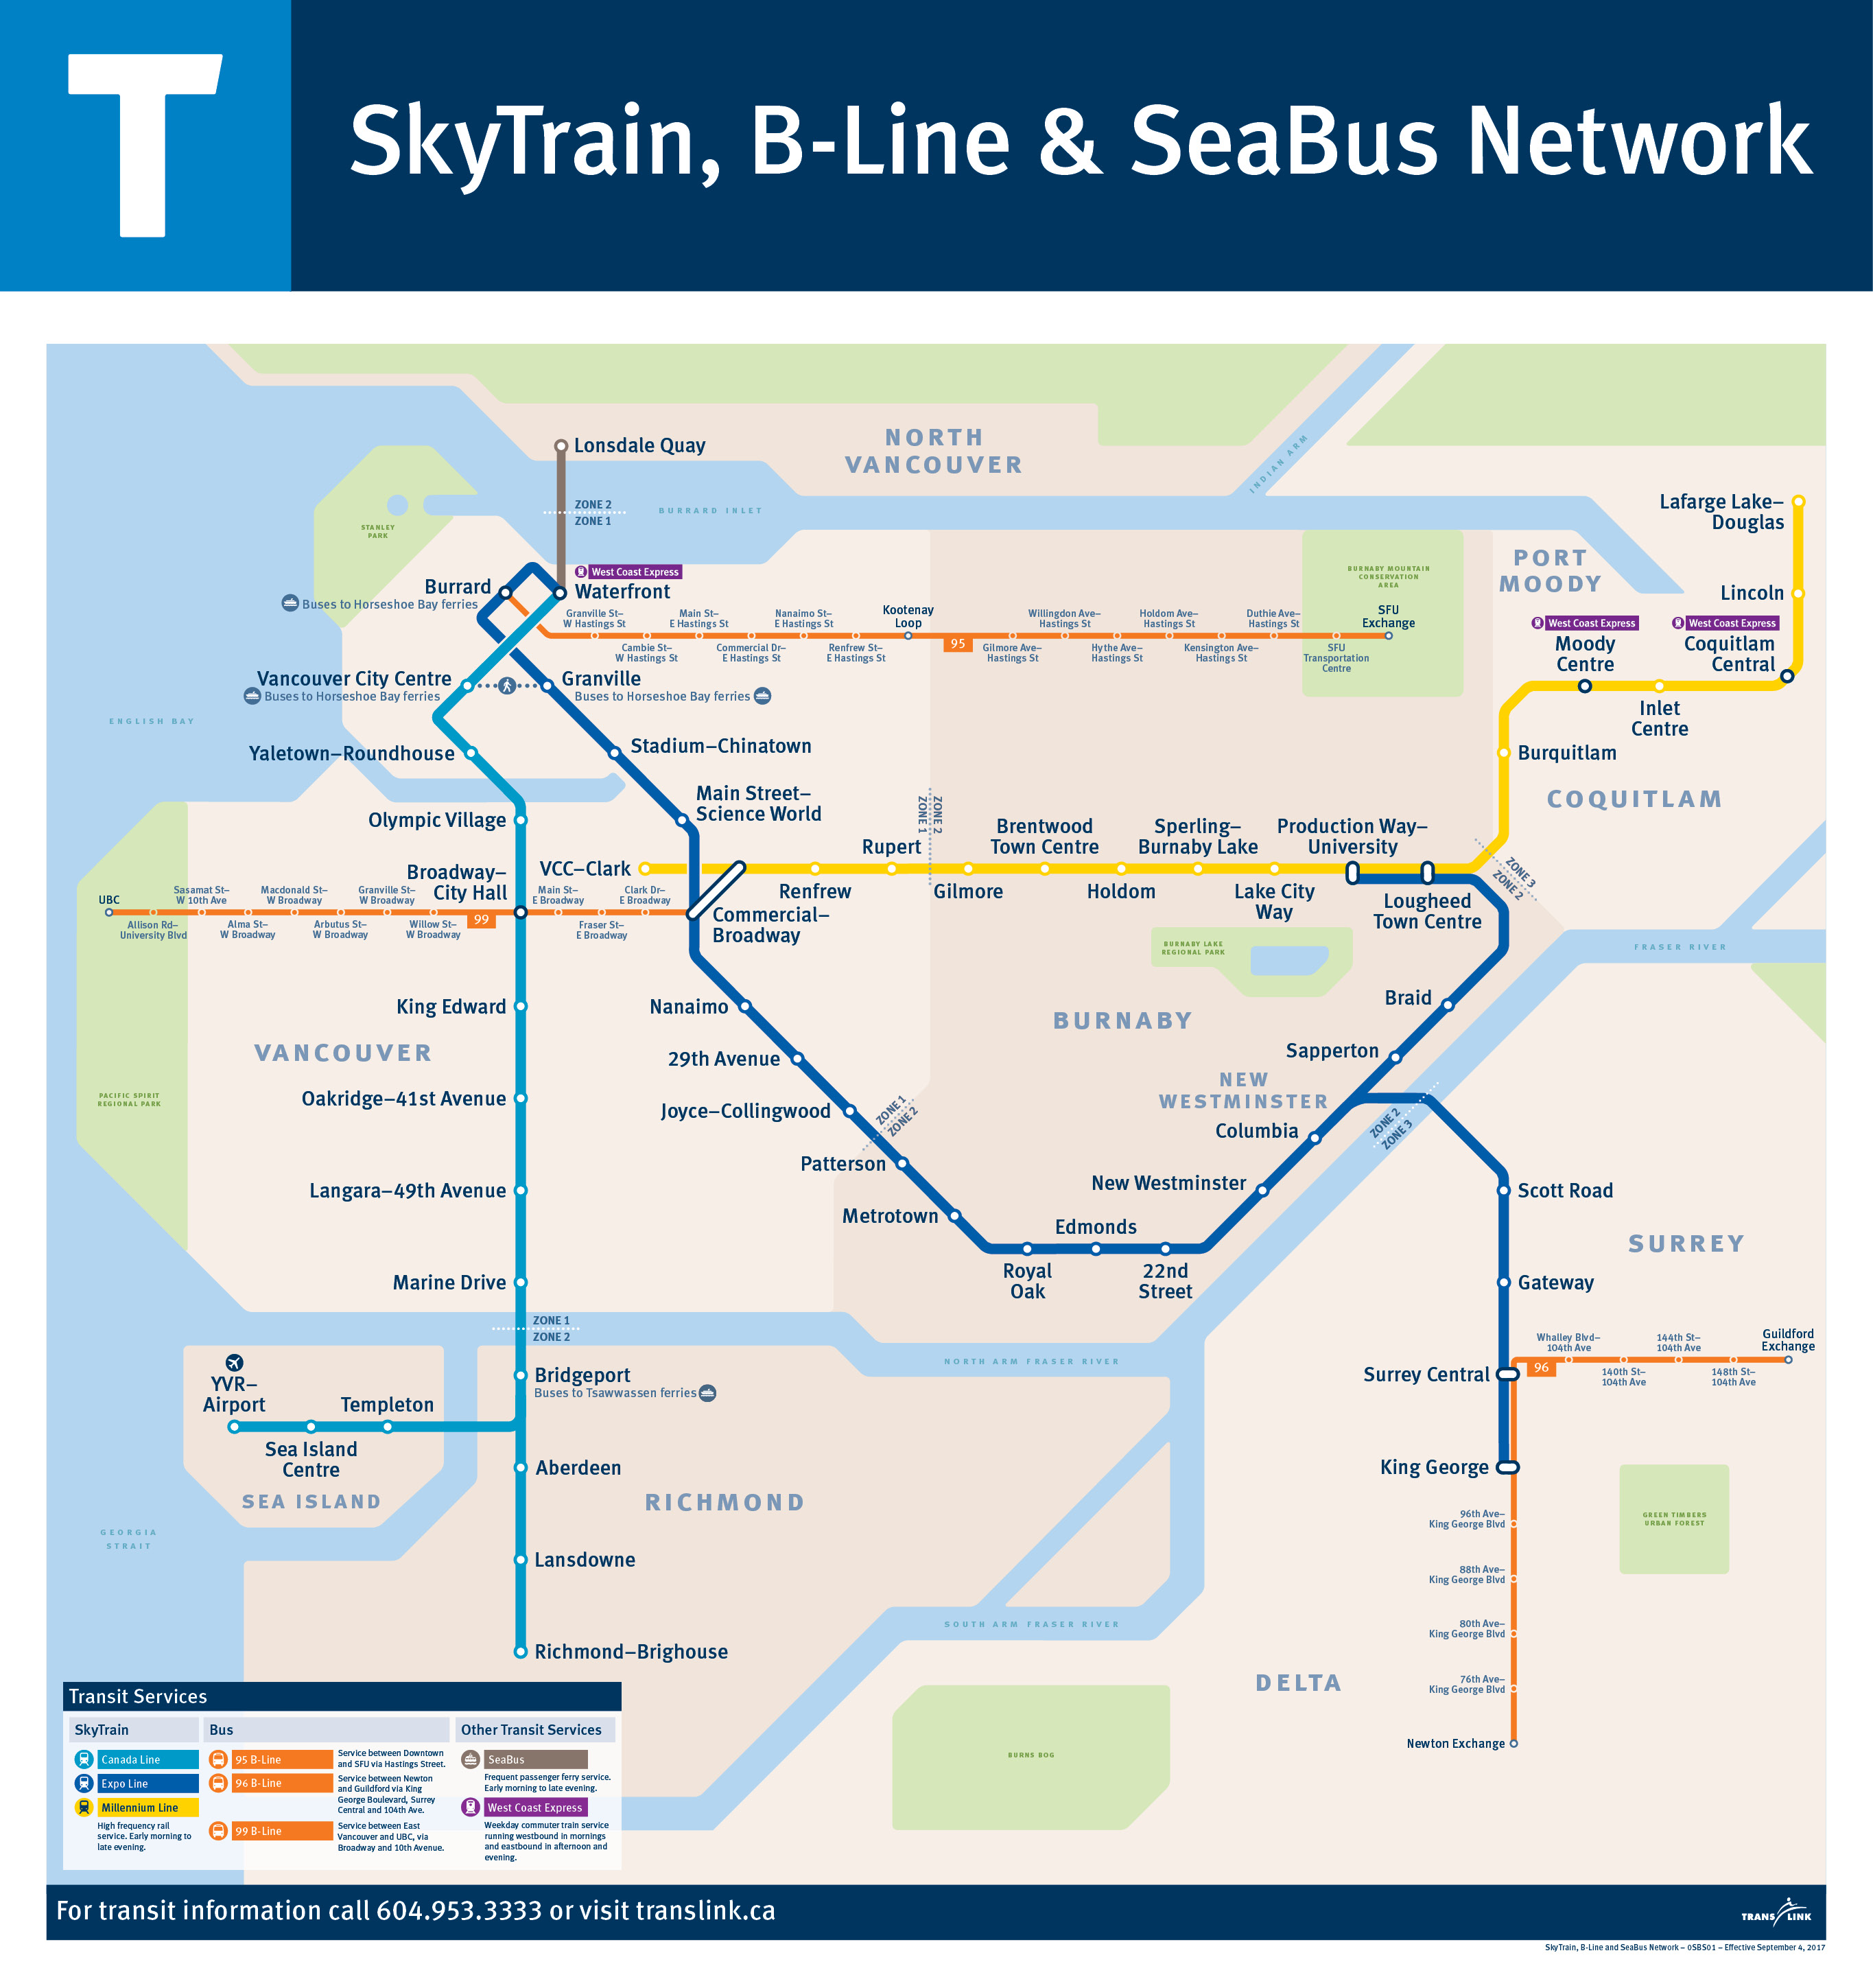 The SkyTrain, B-Line and SeaBus Network map